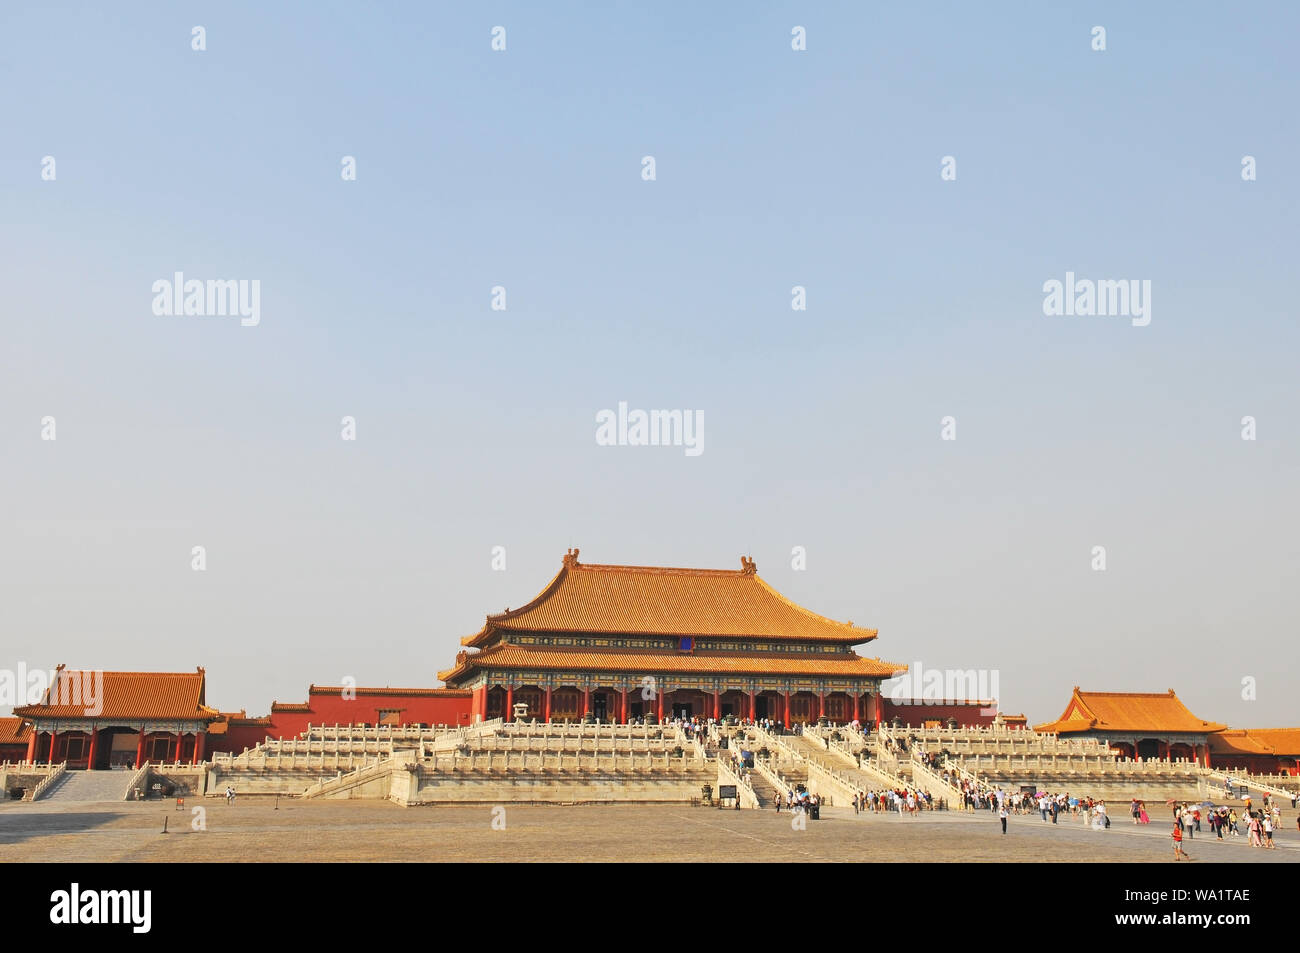 Cityscape of the Forbidden City with tourists walking towards the Hall of Supreme Harmony, Beijing, China. Stock Photo